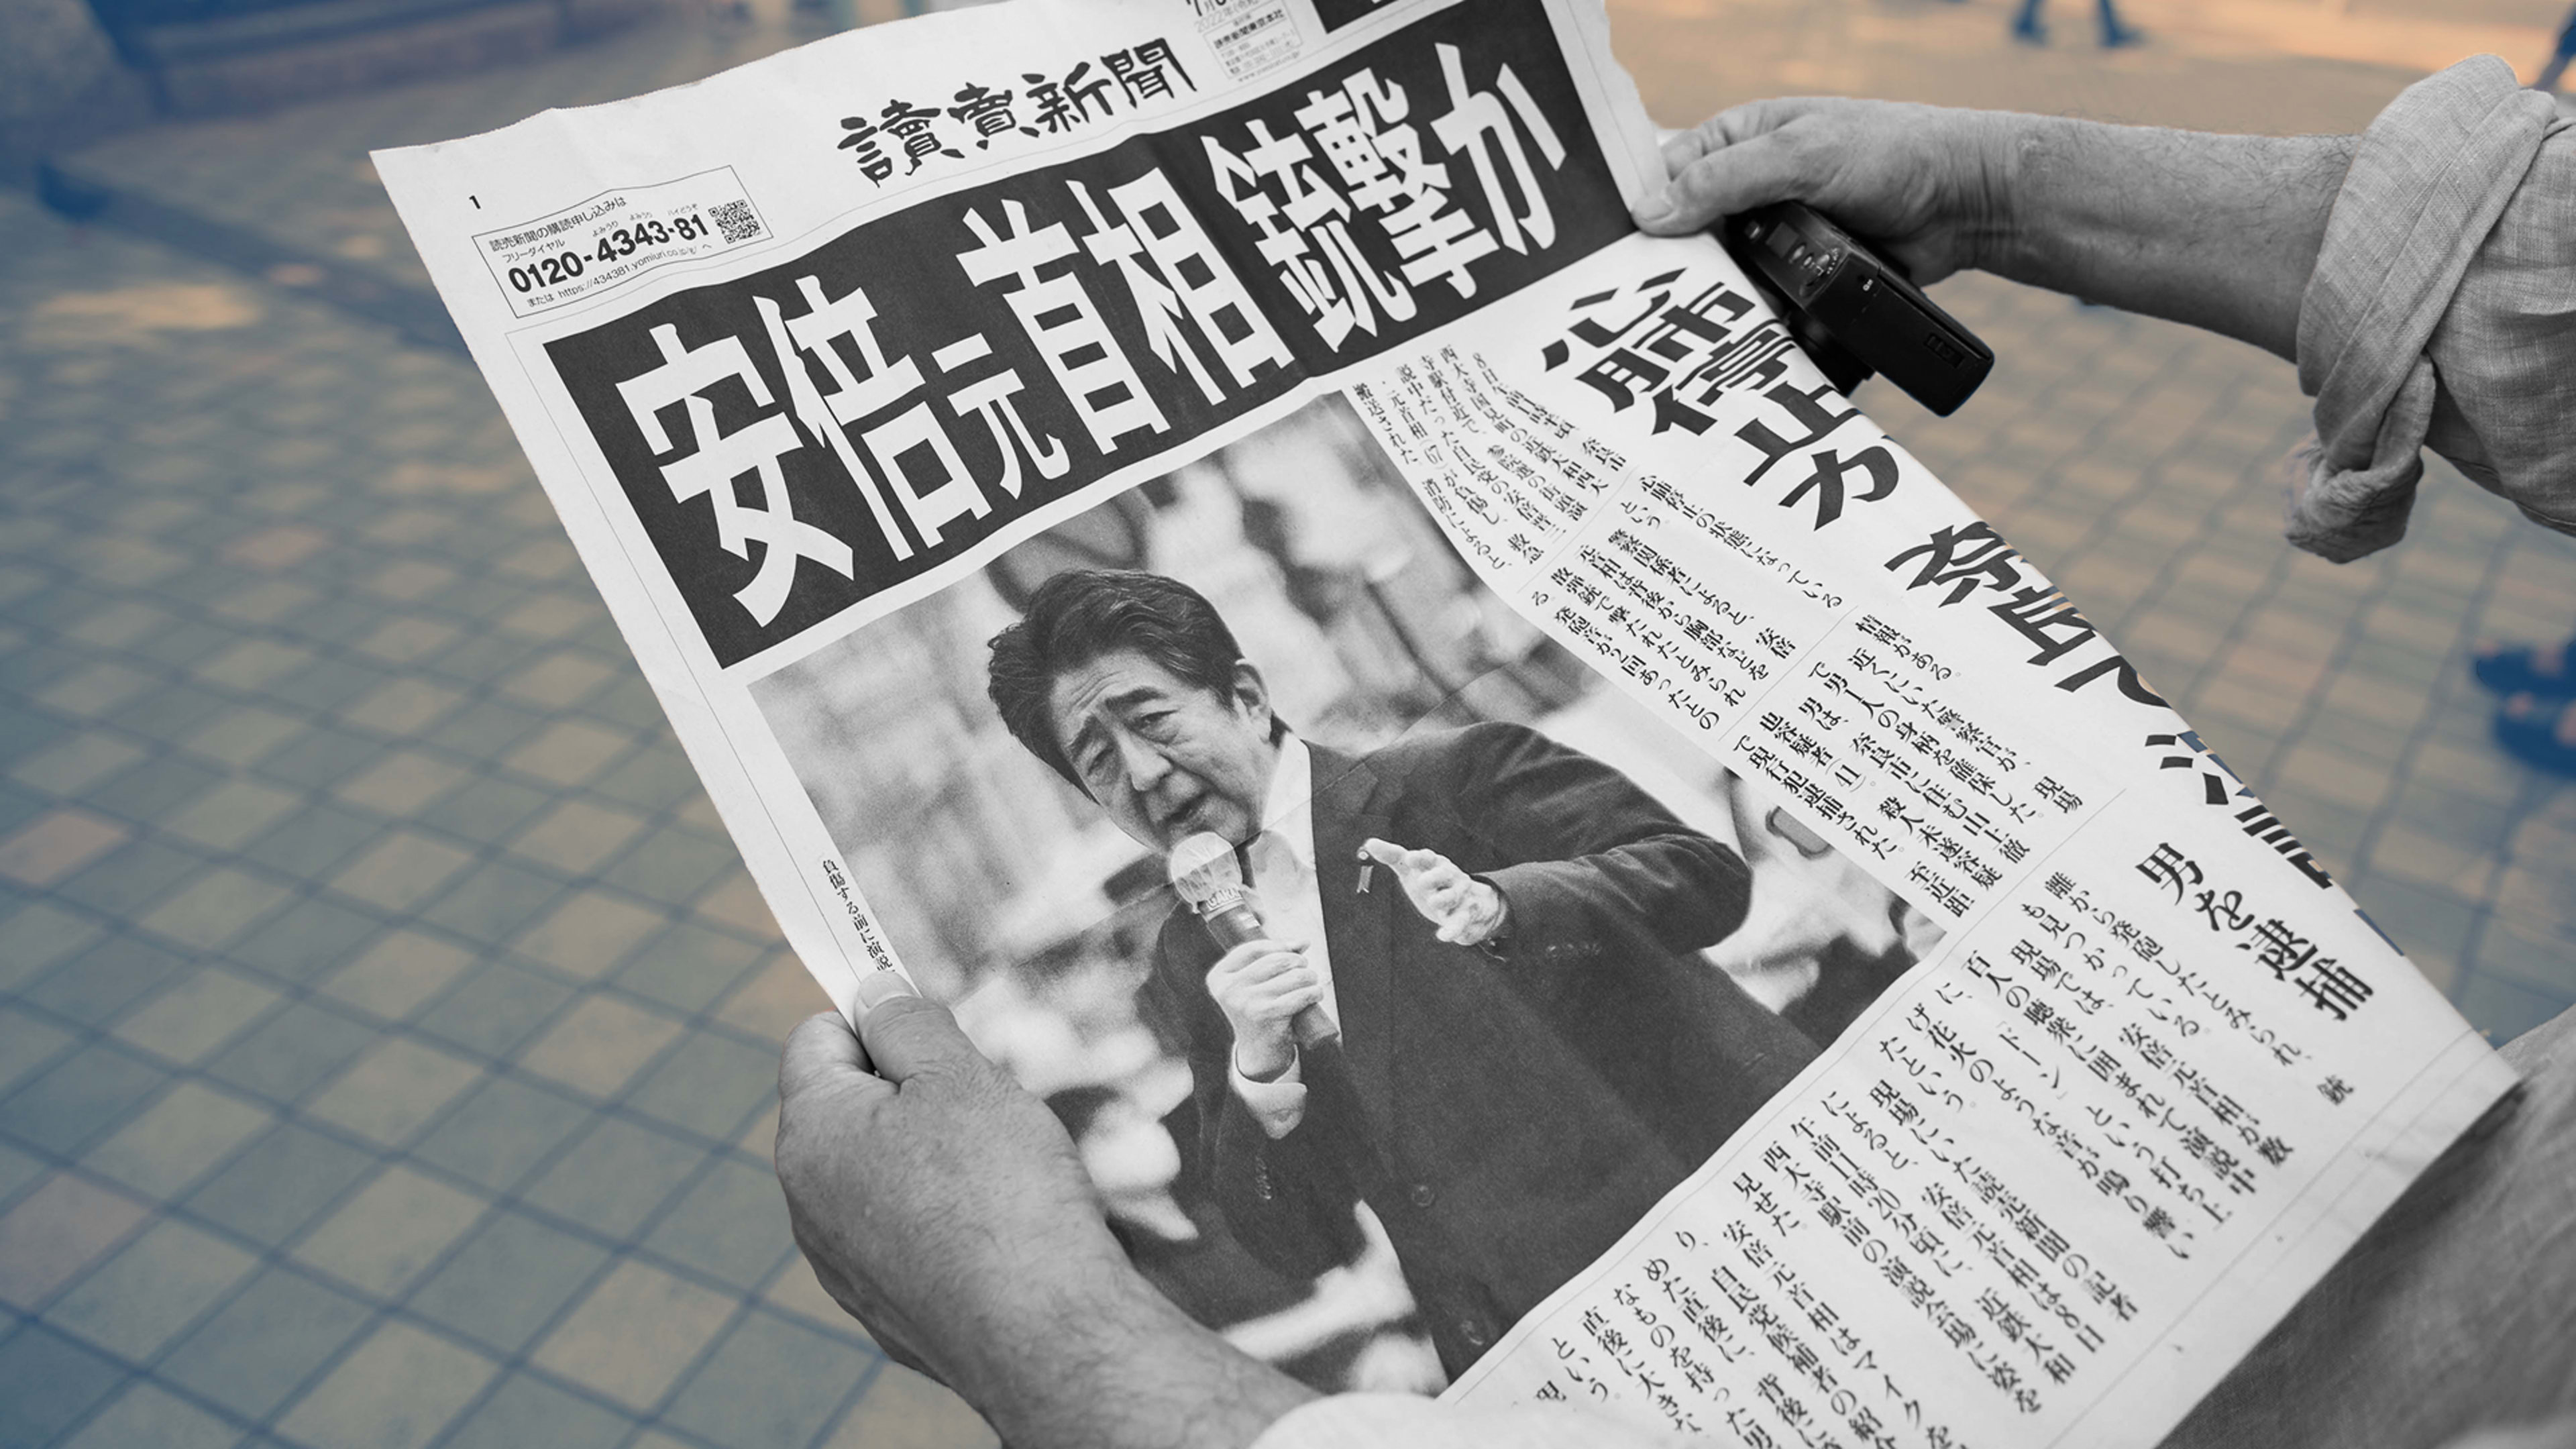 Shinzo Abe’s assassination draws attention to Japan’s extremely rare gun crime